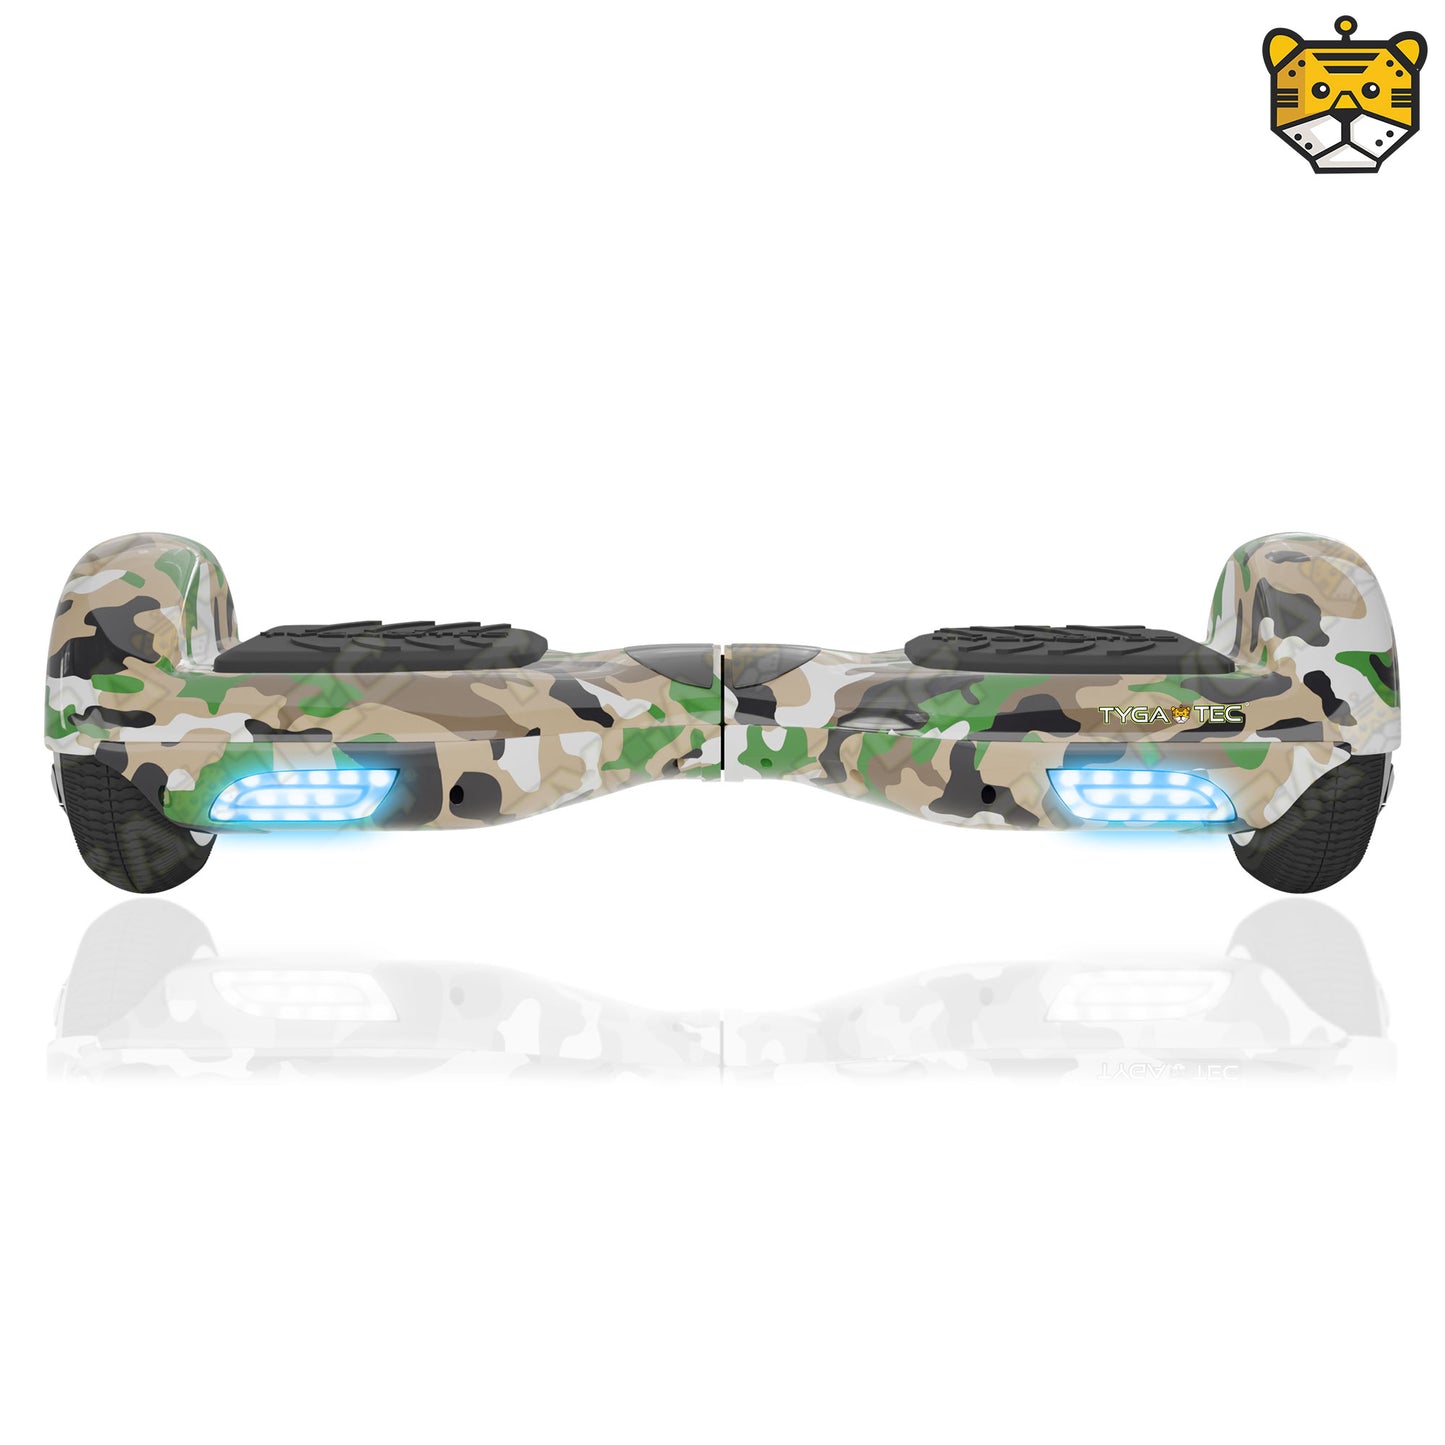 TYGATEC T2 Auto Balancing Hoverboard - Green